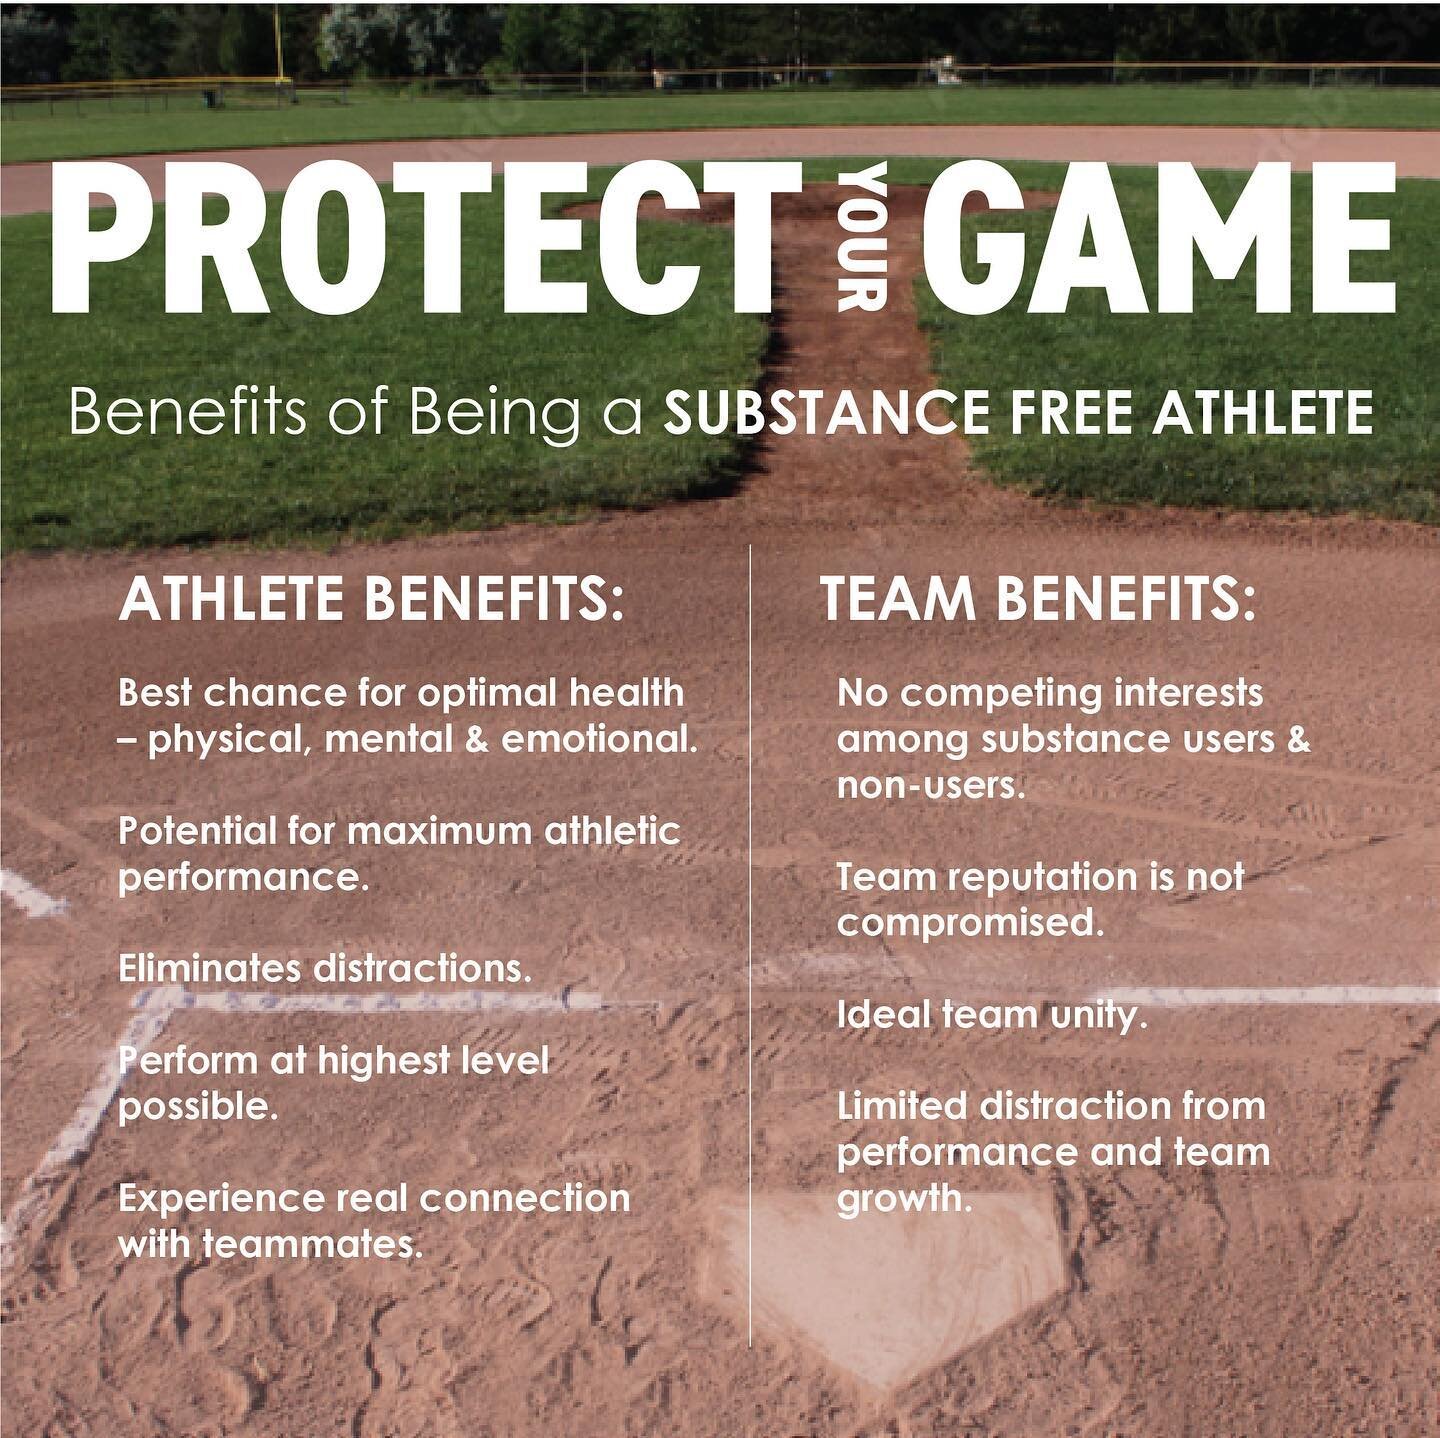 All SPRING-sport athletes!!!&nbsp; Take the Protect Your Game Challenge&nbsp; See the benefits of being Substance-Free in this post.&nbsp;Talk to your team about making this the season as strong as possible!!

#ProtectYourGame, #PYG, #SubstanceFreeAt